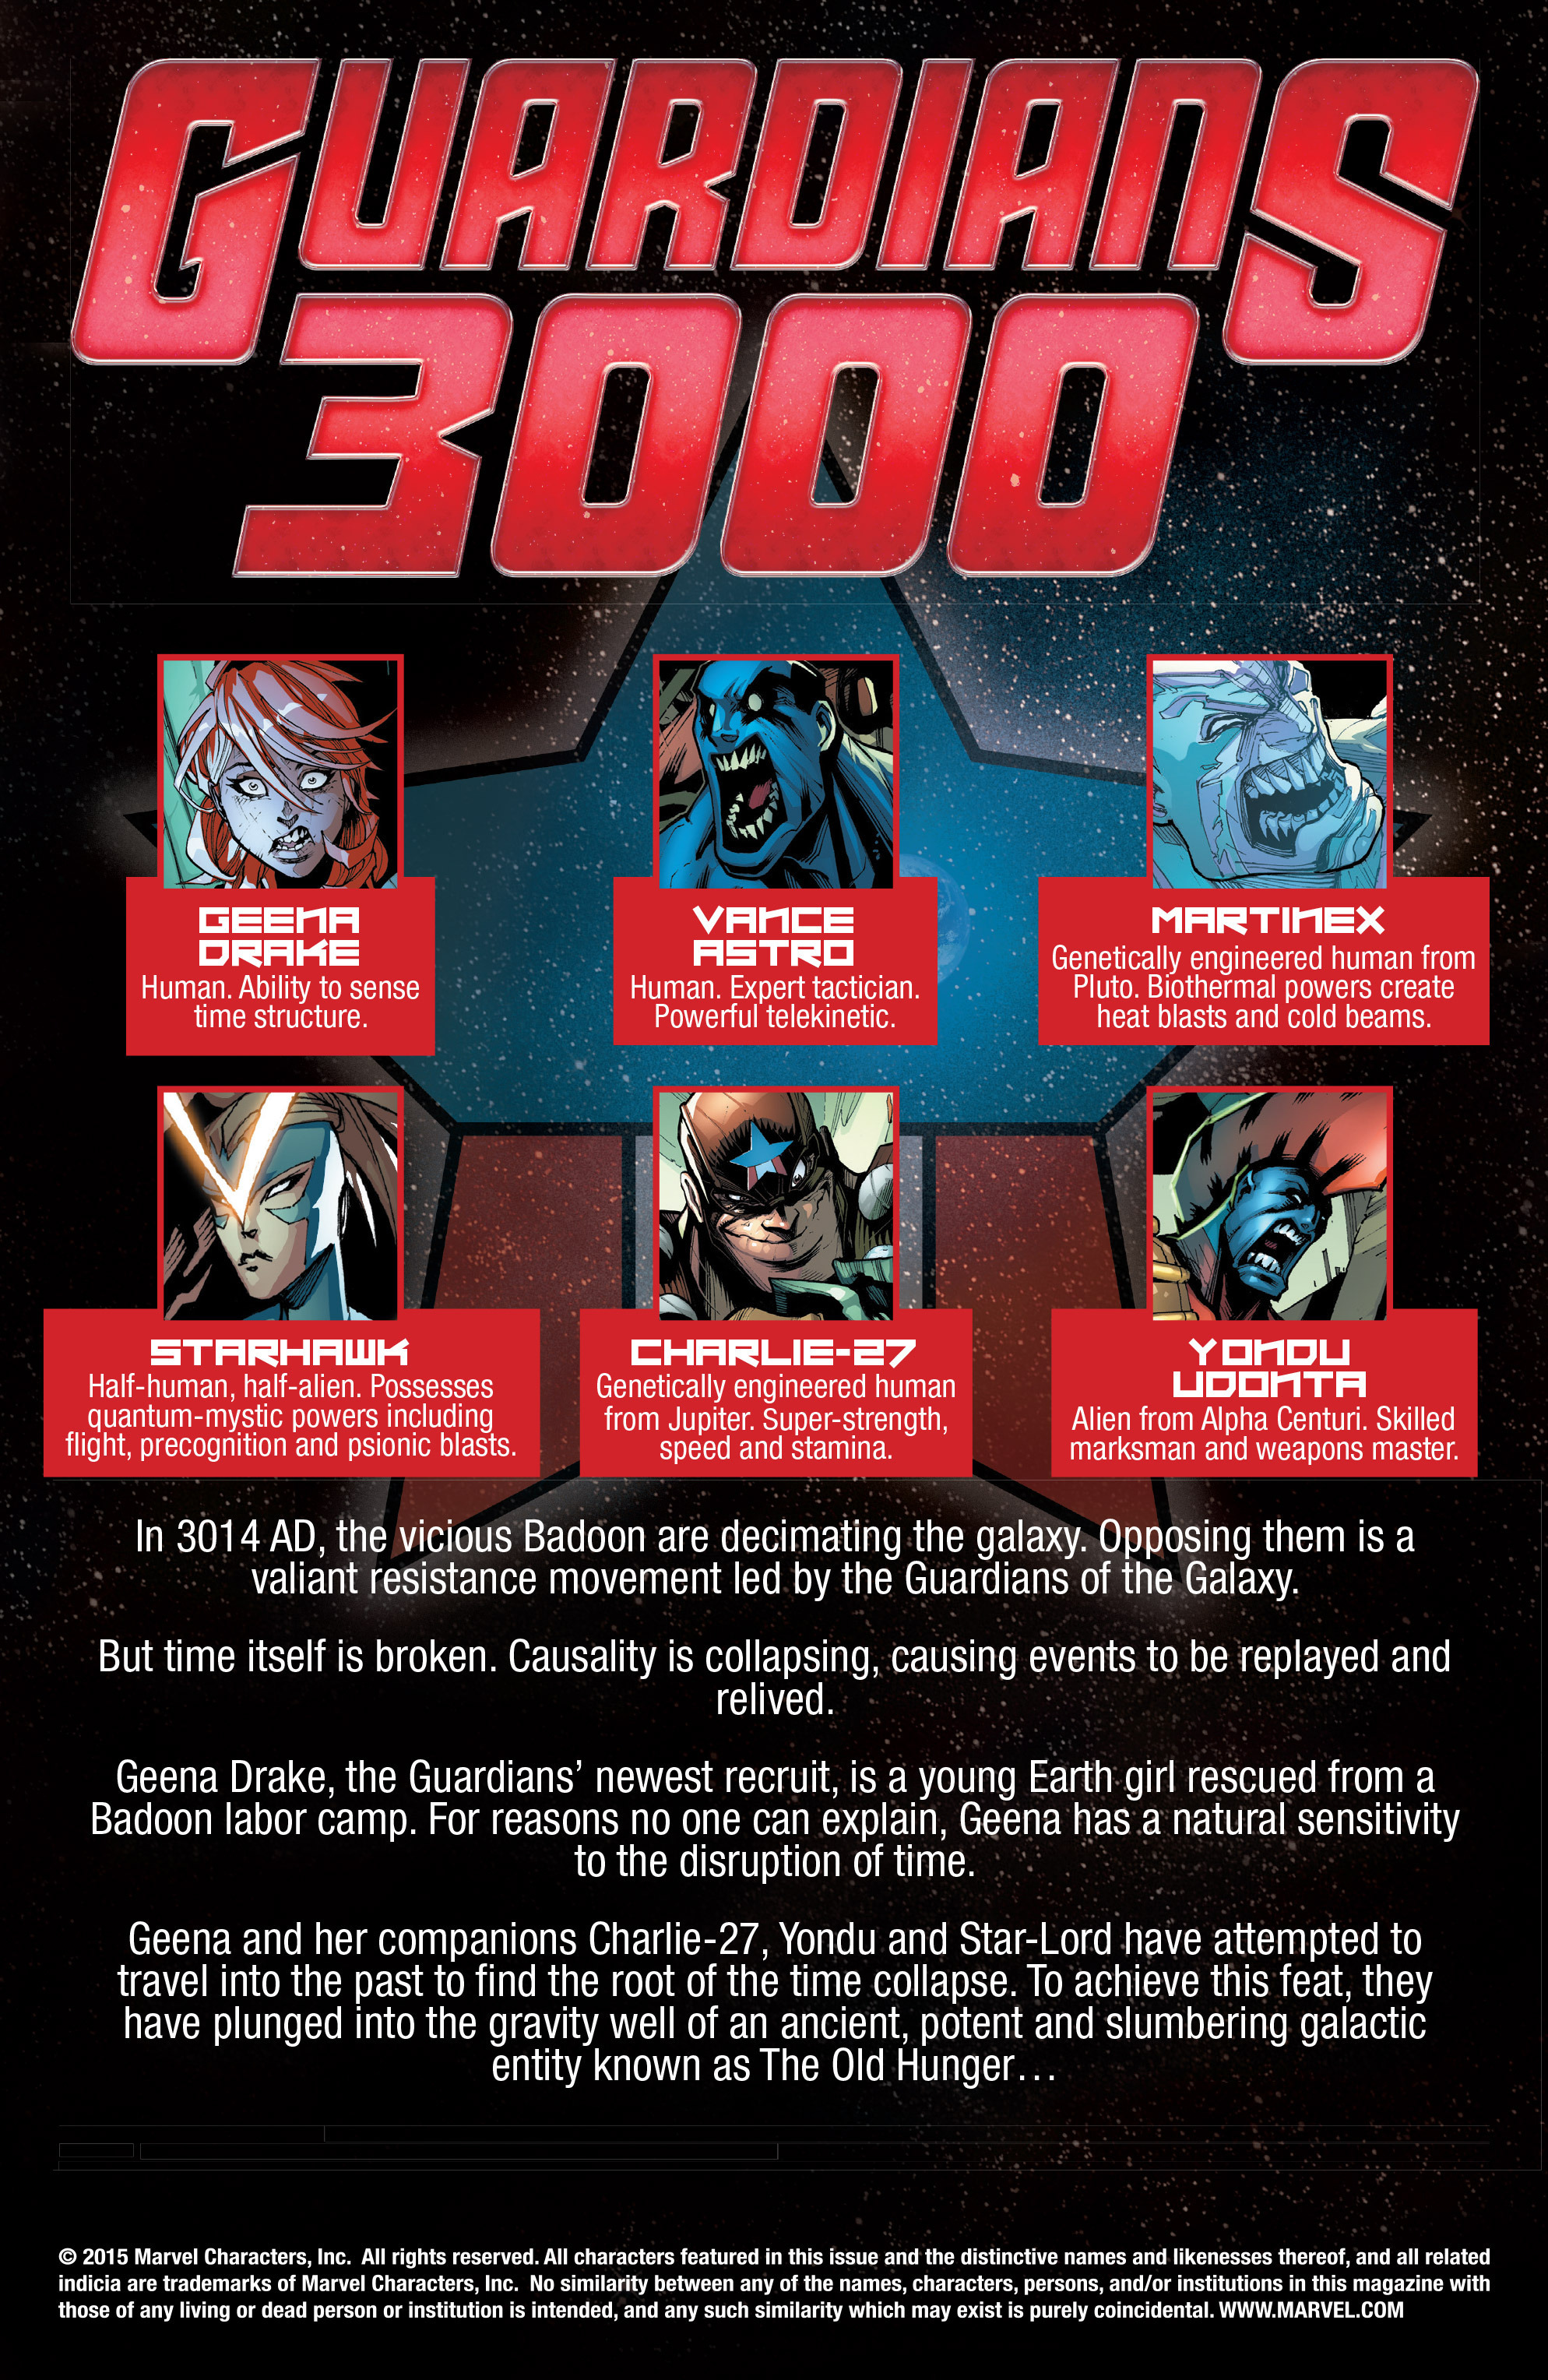 Read online Guardians 3000 comic -  Issue #6 - 2